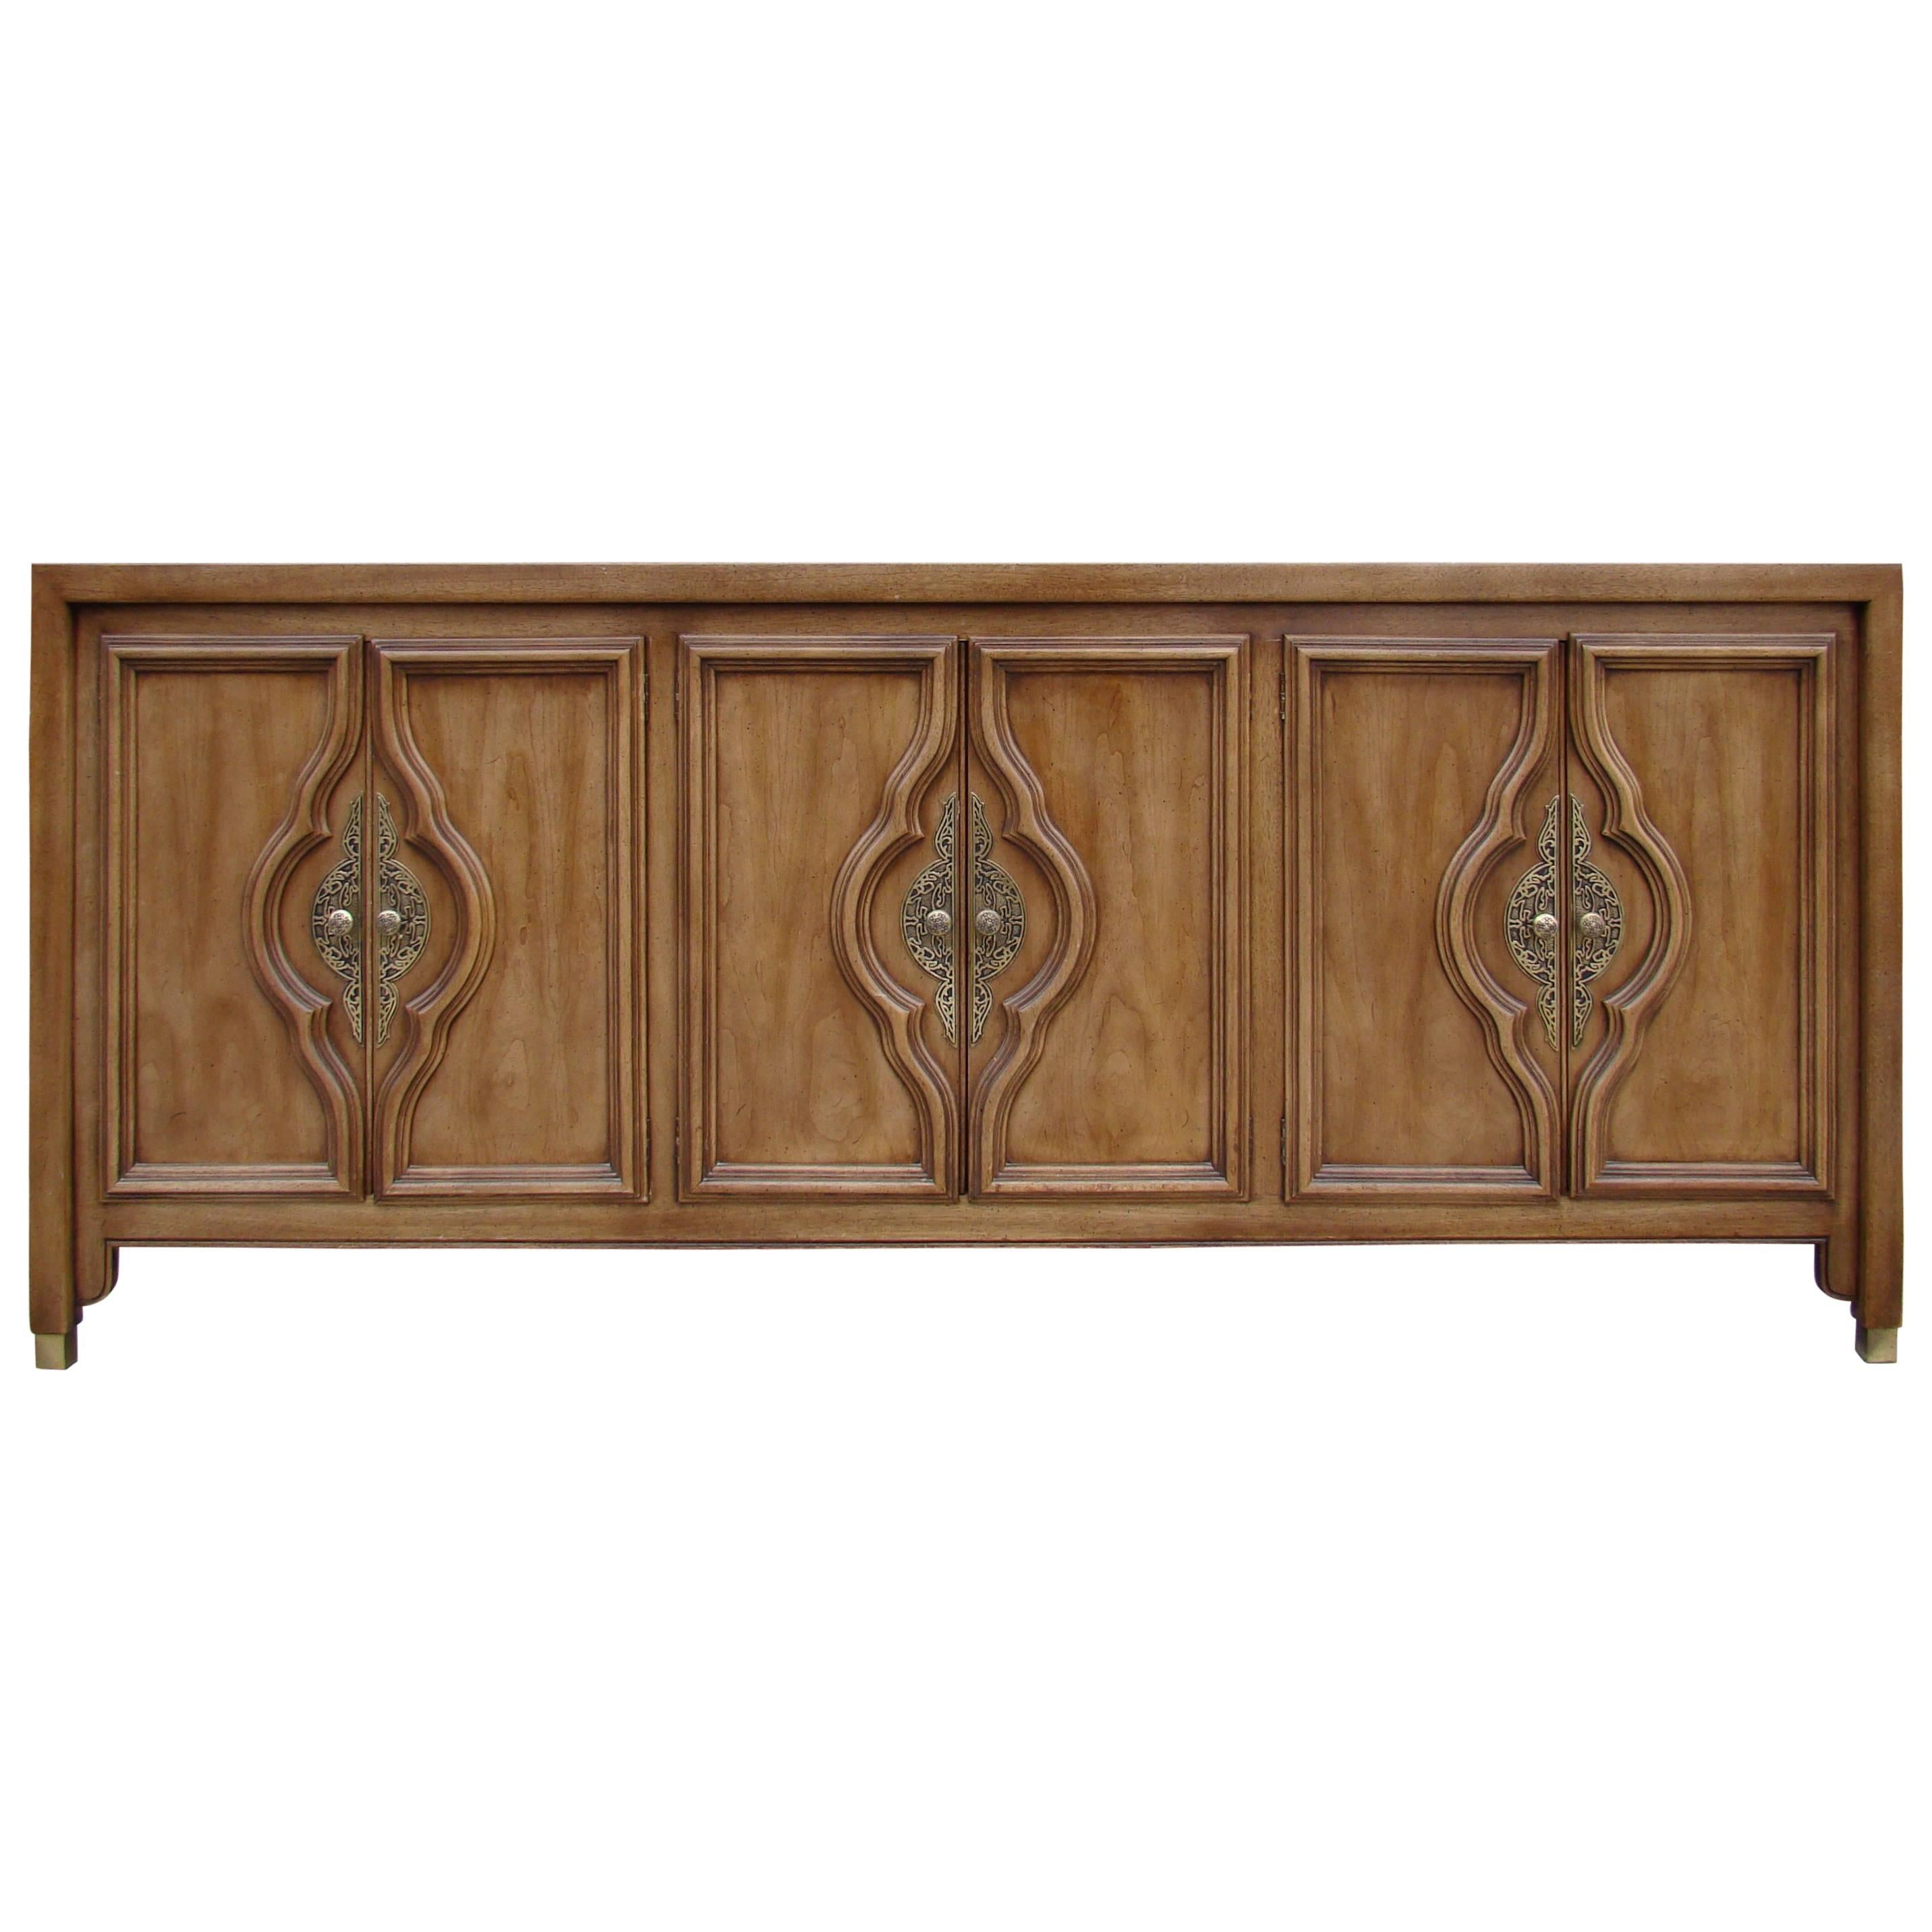 Modernist Credenza or Sideboard by Century Furniture in the Style of James Mont For Sale